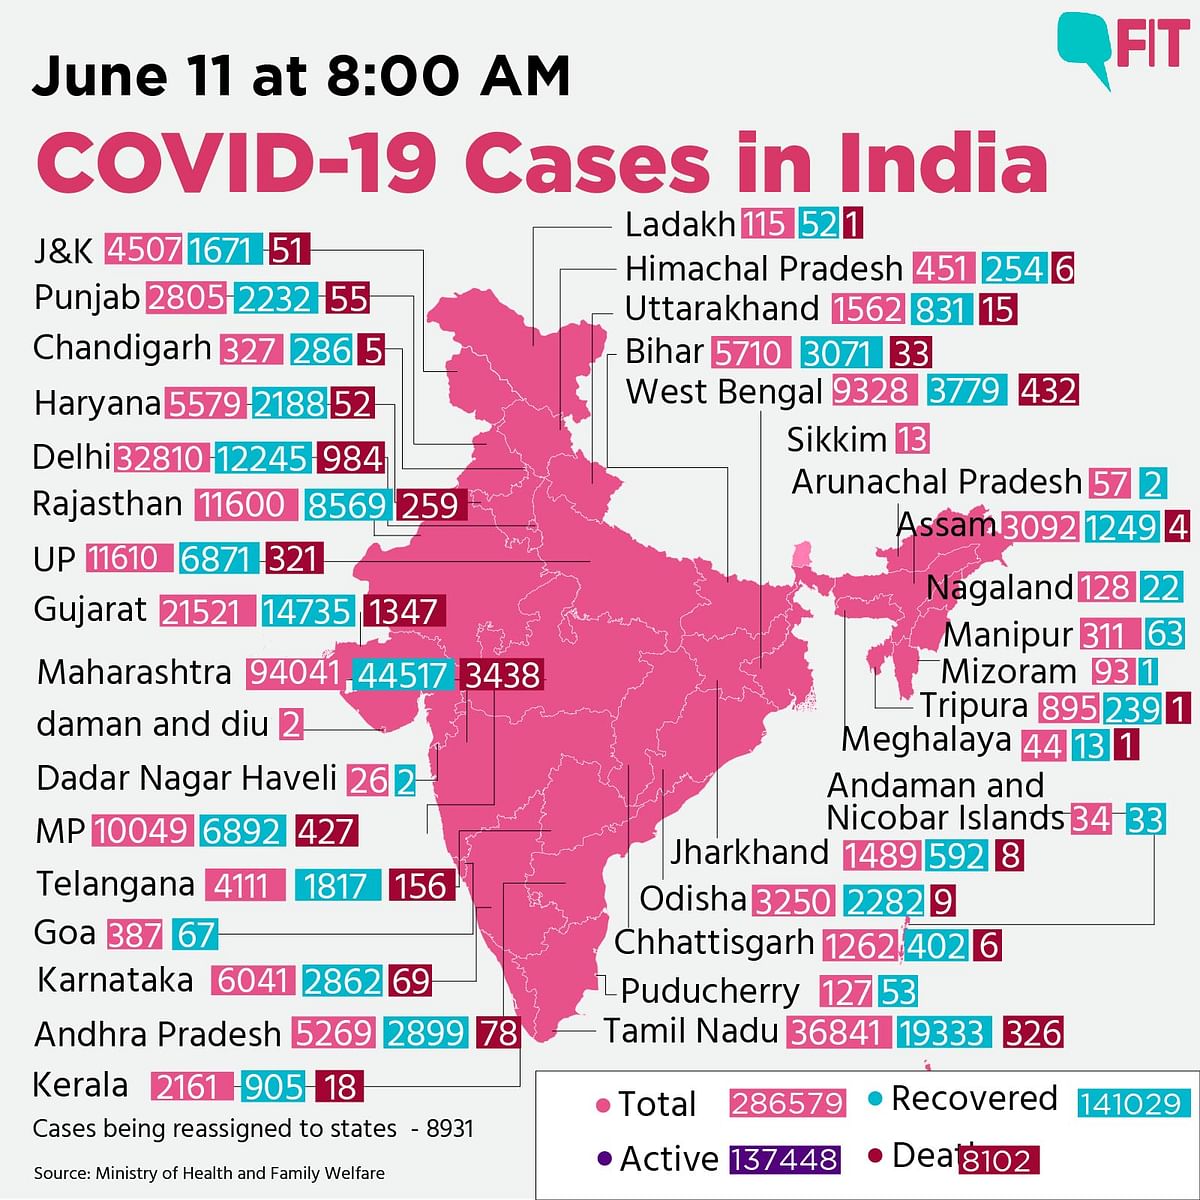 COVID-19 India Update: 10k Fresh Cases, 375 Deaths a Day